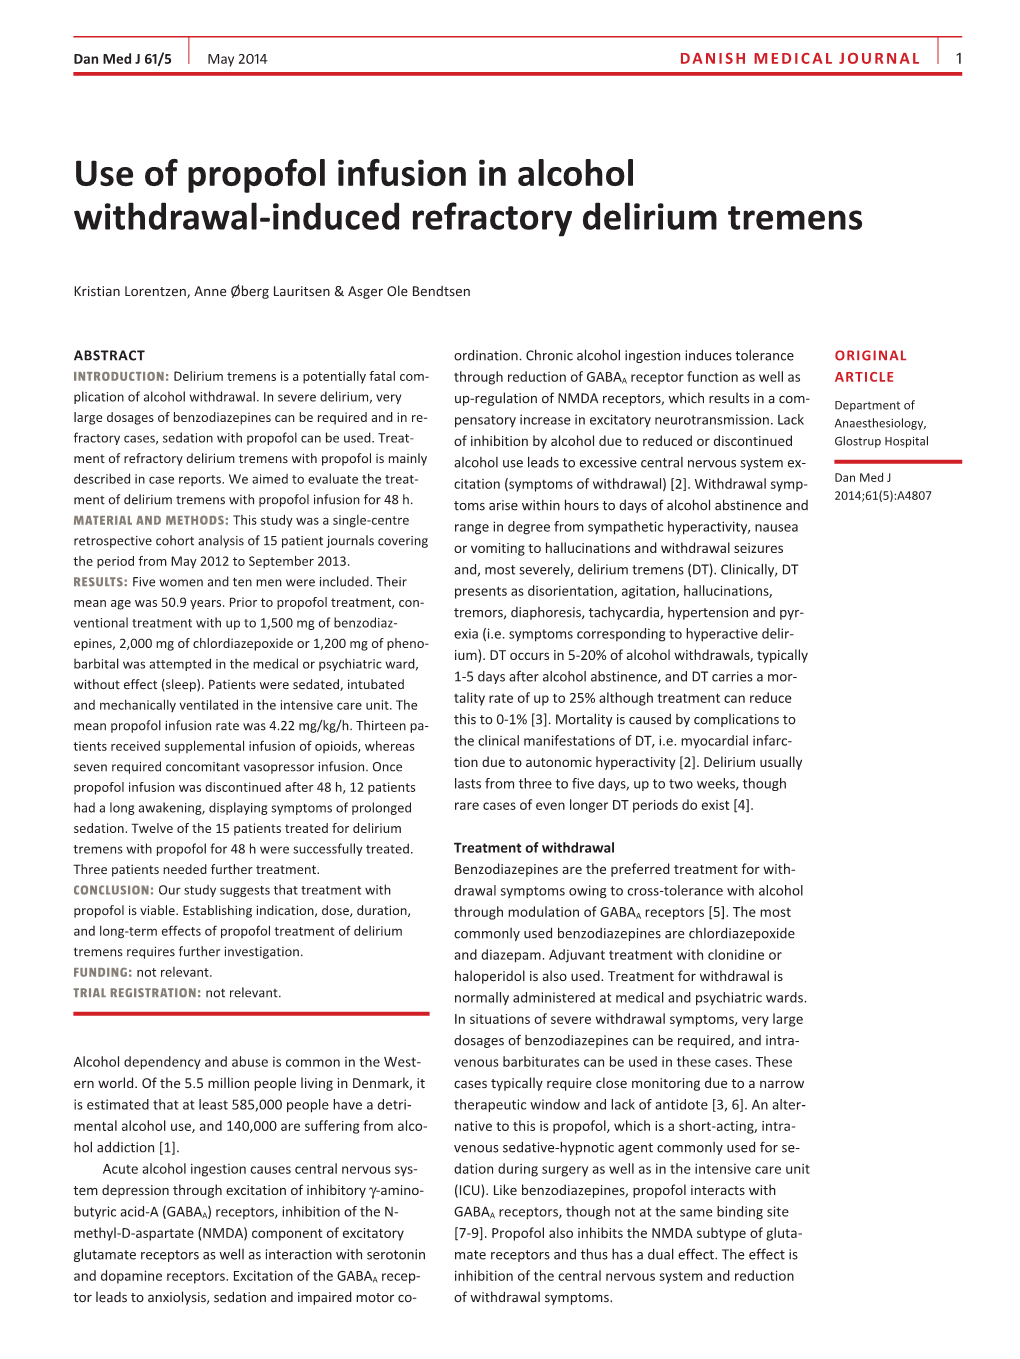 Use of Propofol Infusion in Alcohol Withdrawal-Induced Refractory Delirium Tremens